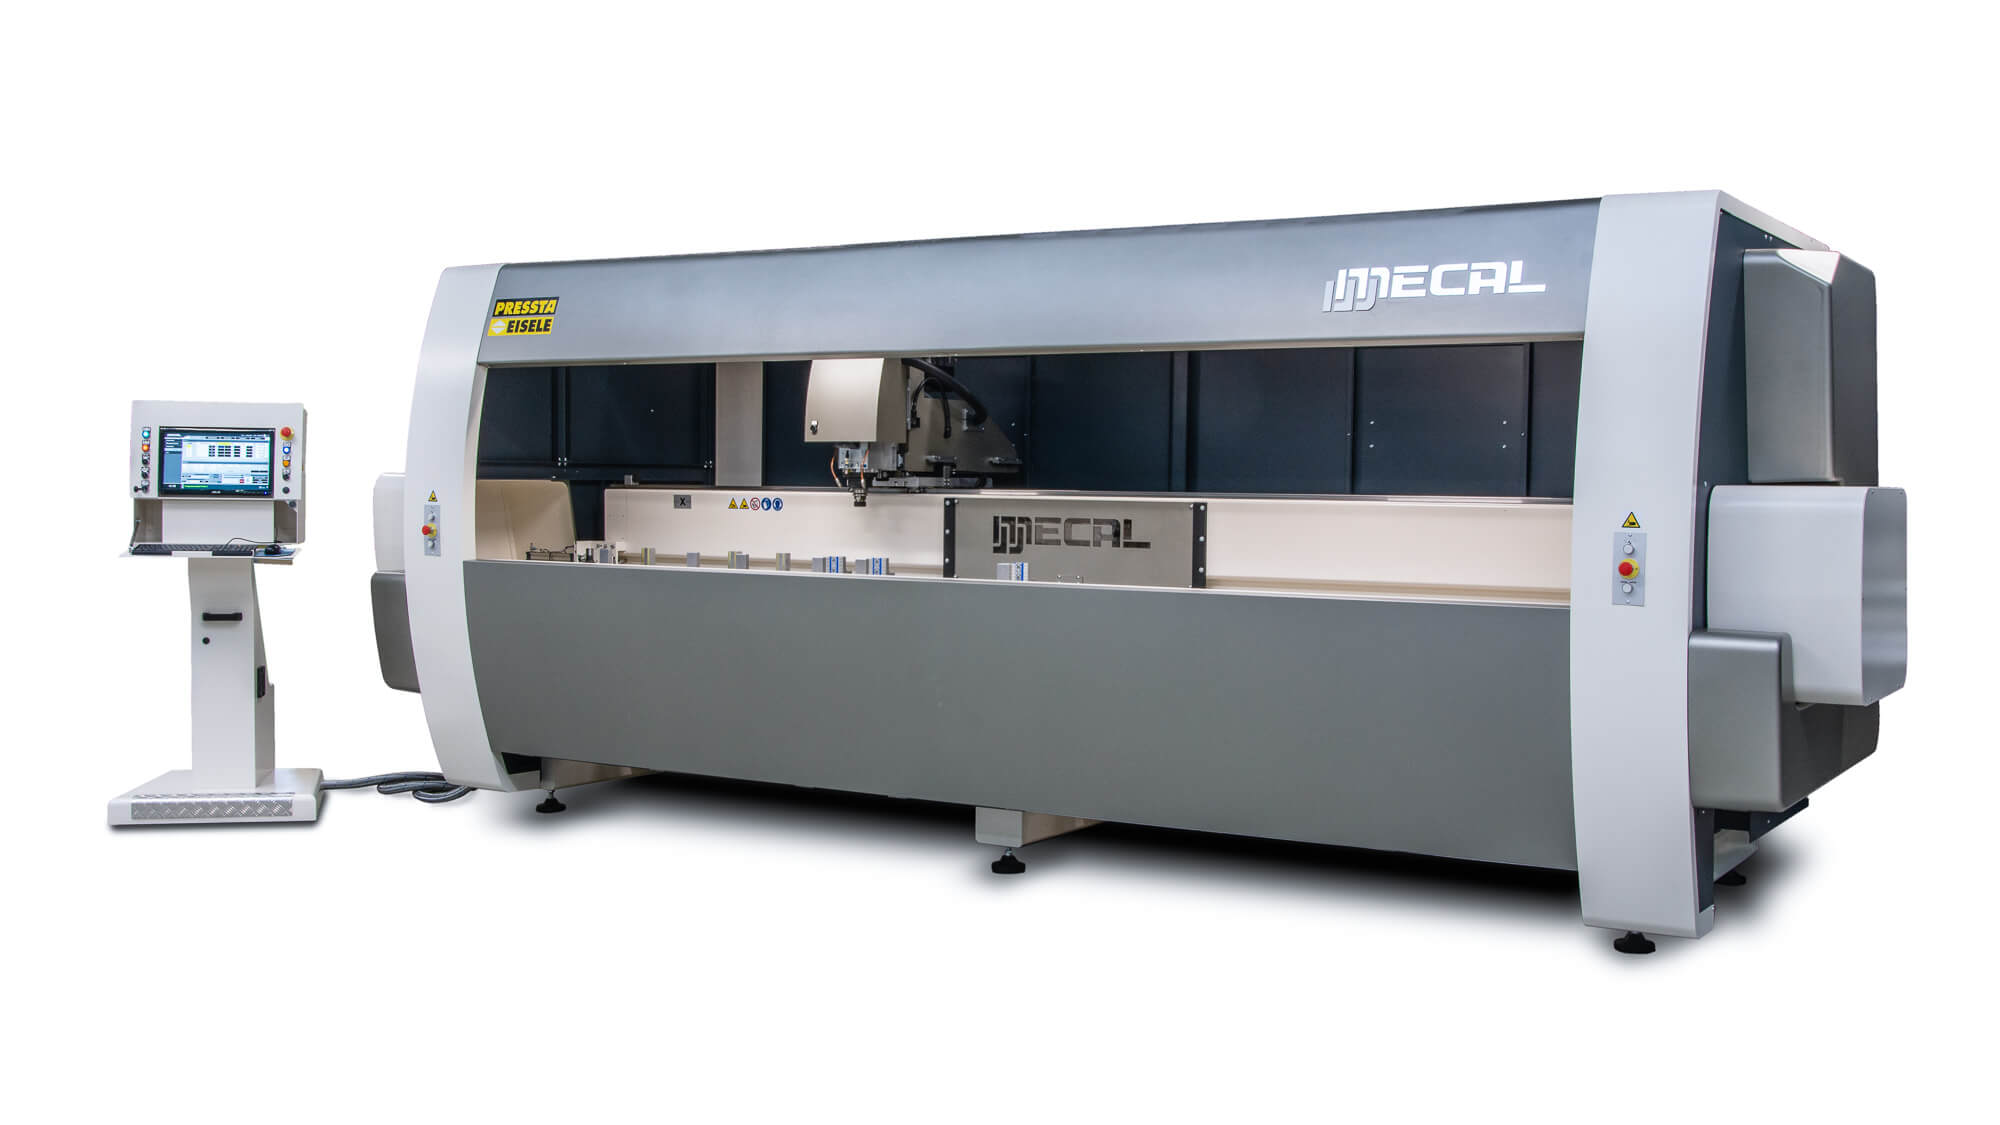 MC 307 FALCON – CNC machining center with 4 numerically controlled axes